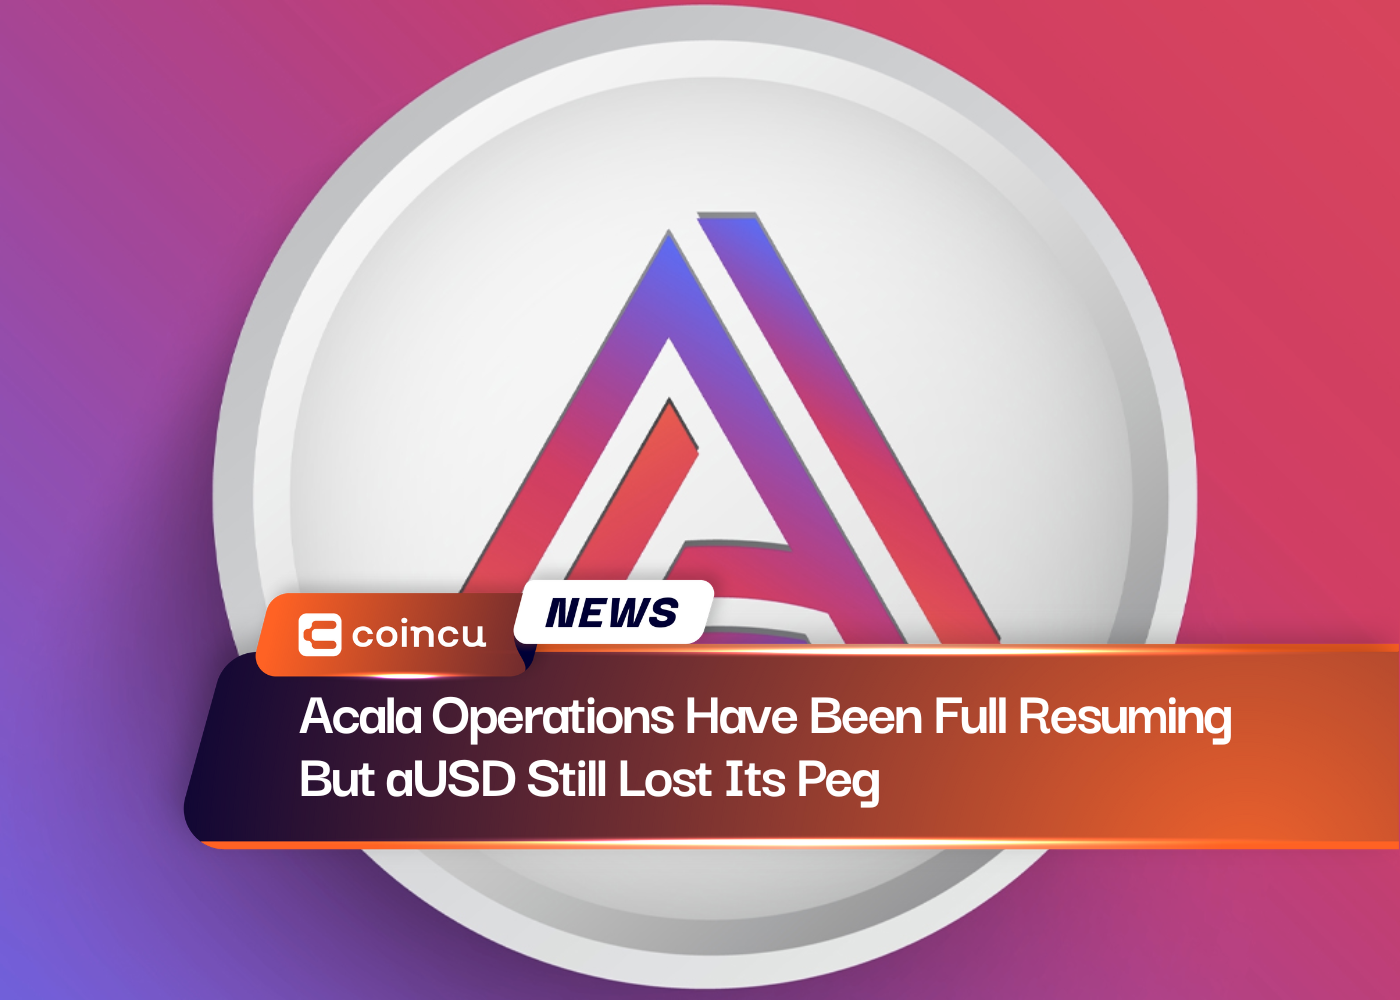 Acala Operations Have Been Full Resuming But aUSD Still Lost Its Peg